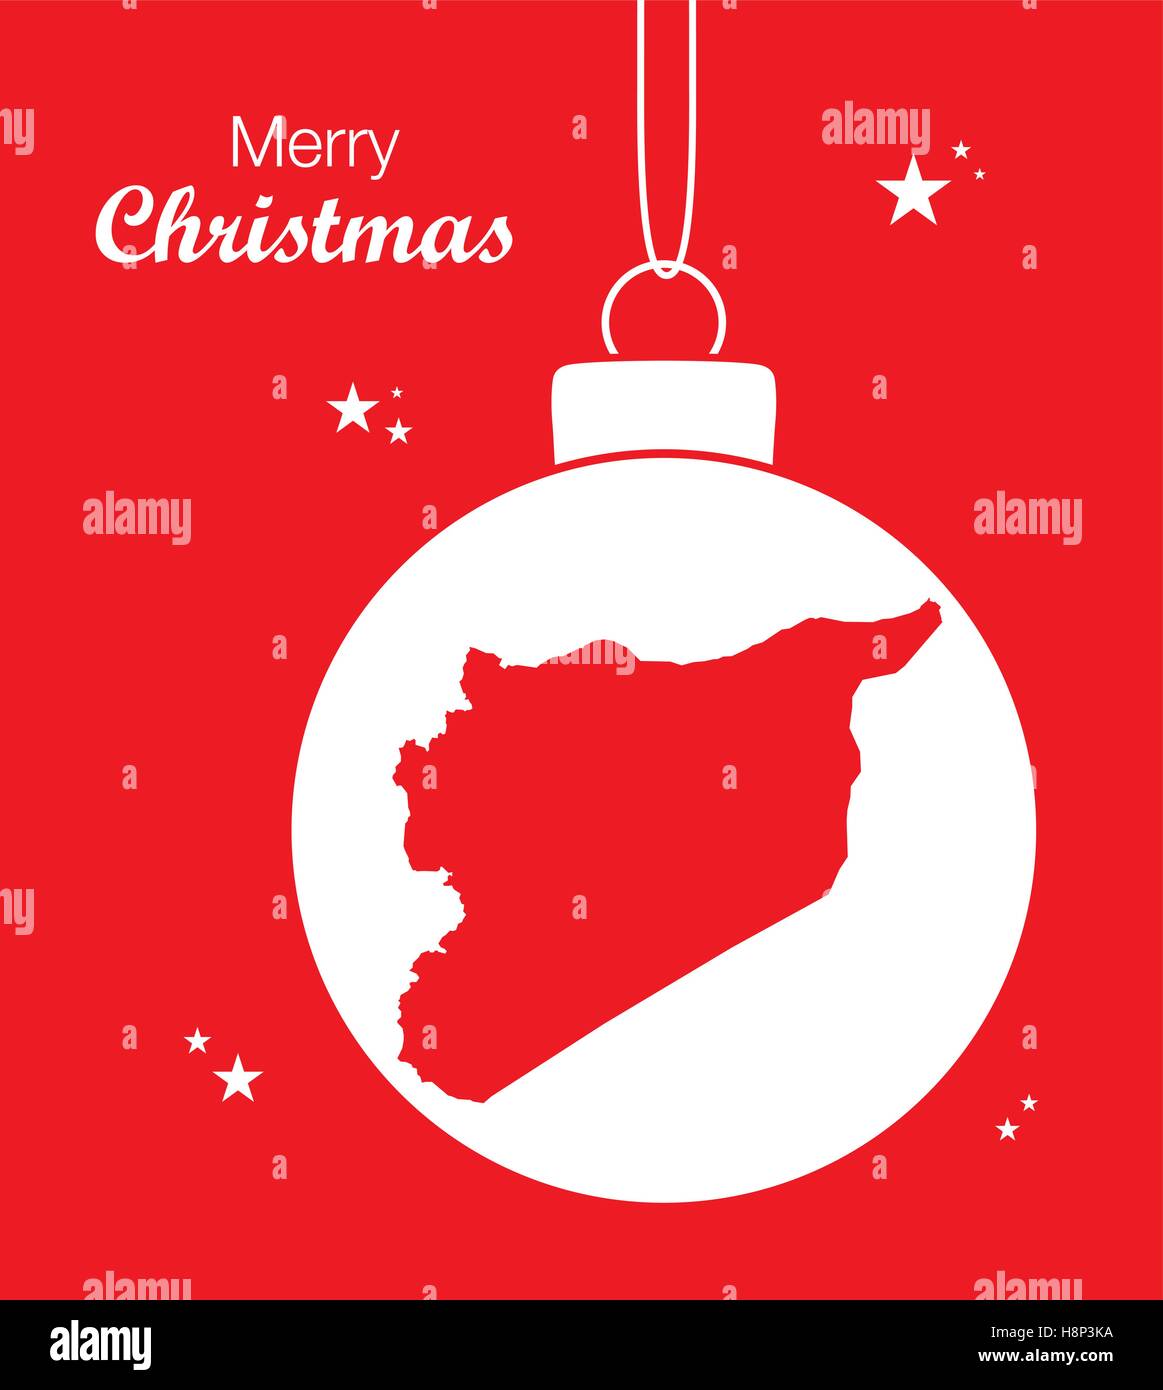 Merry Christmas illustration theme with map of Syria Stock Vector